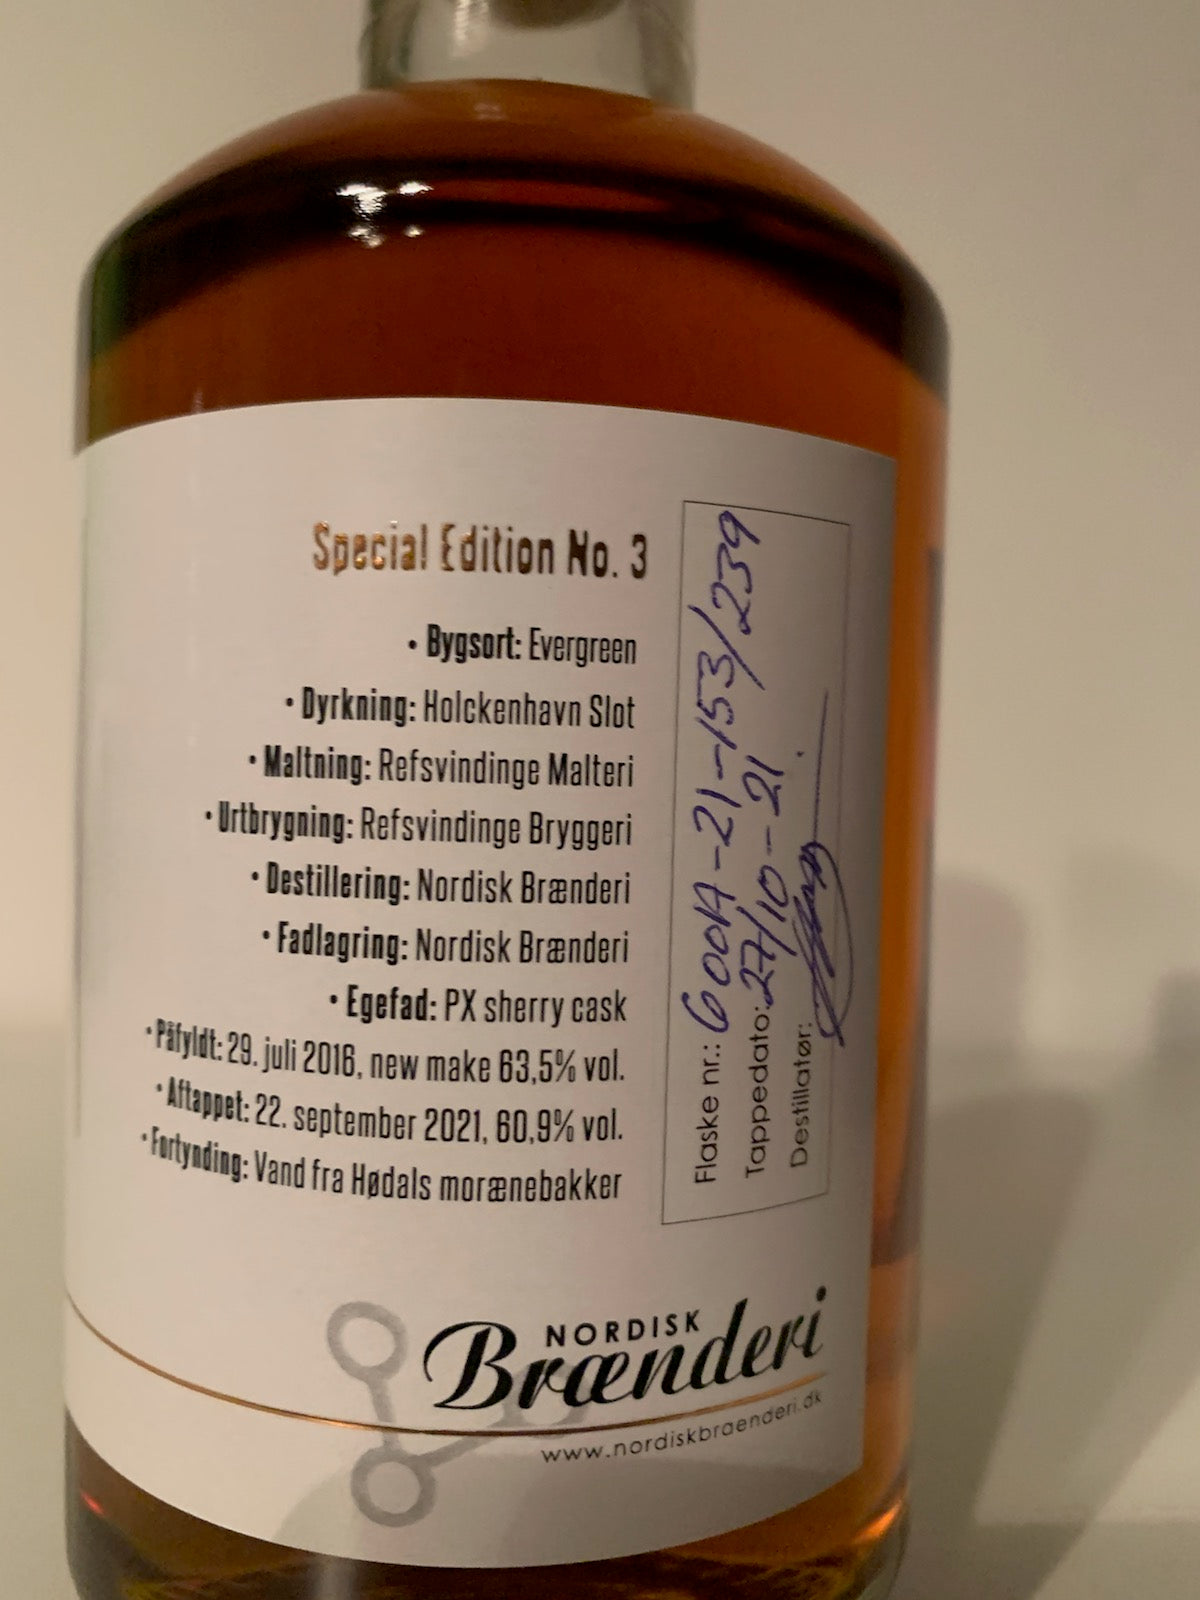 Hødal Whisky Special Edition 3 46% / 50 CL.